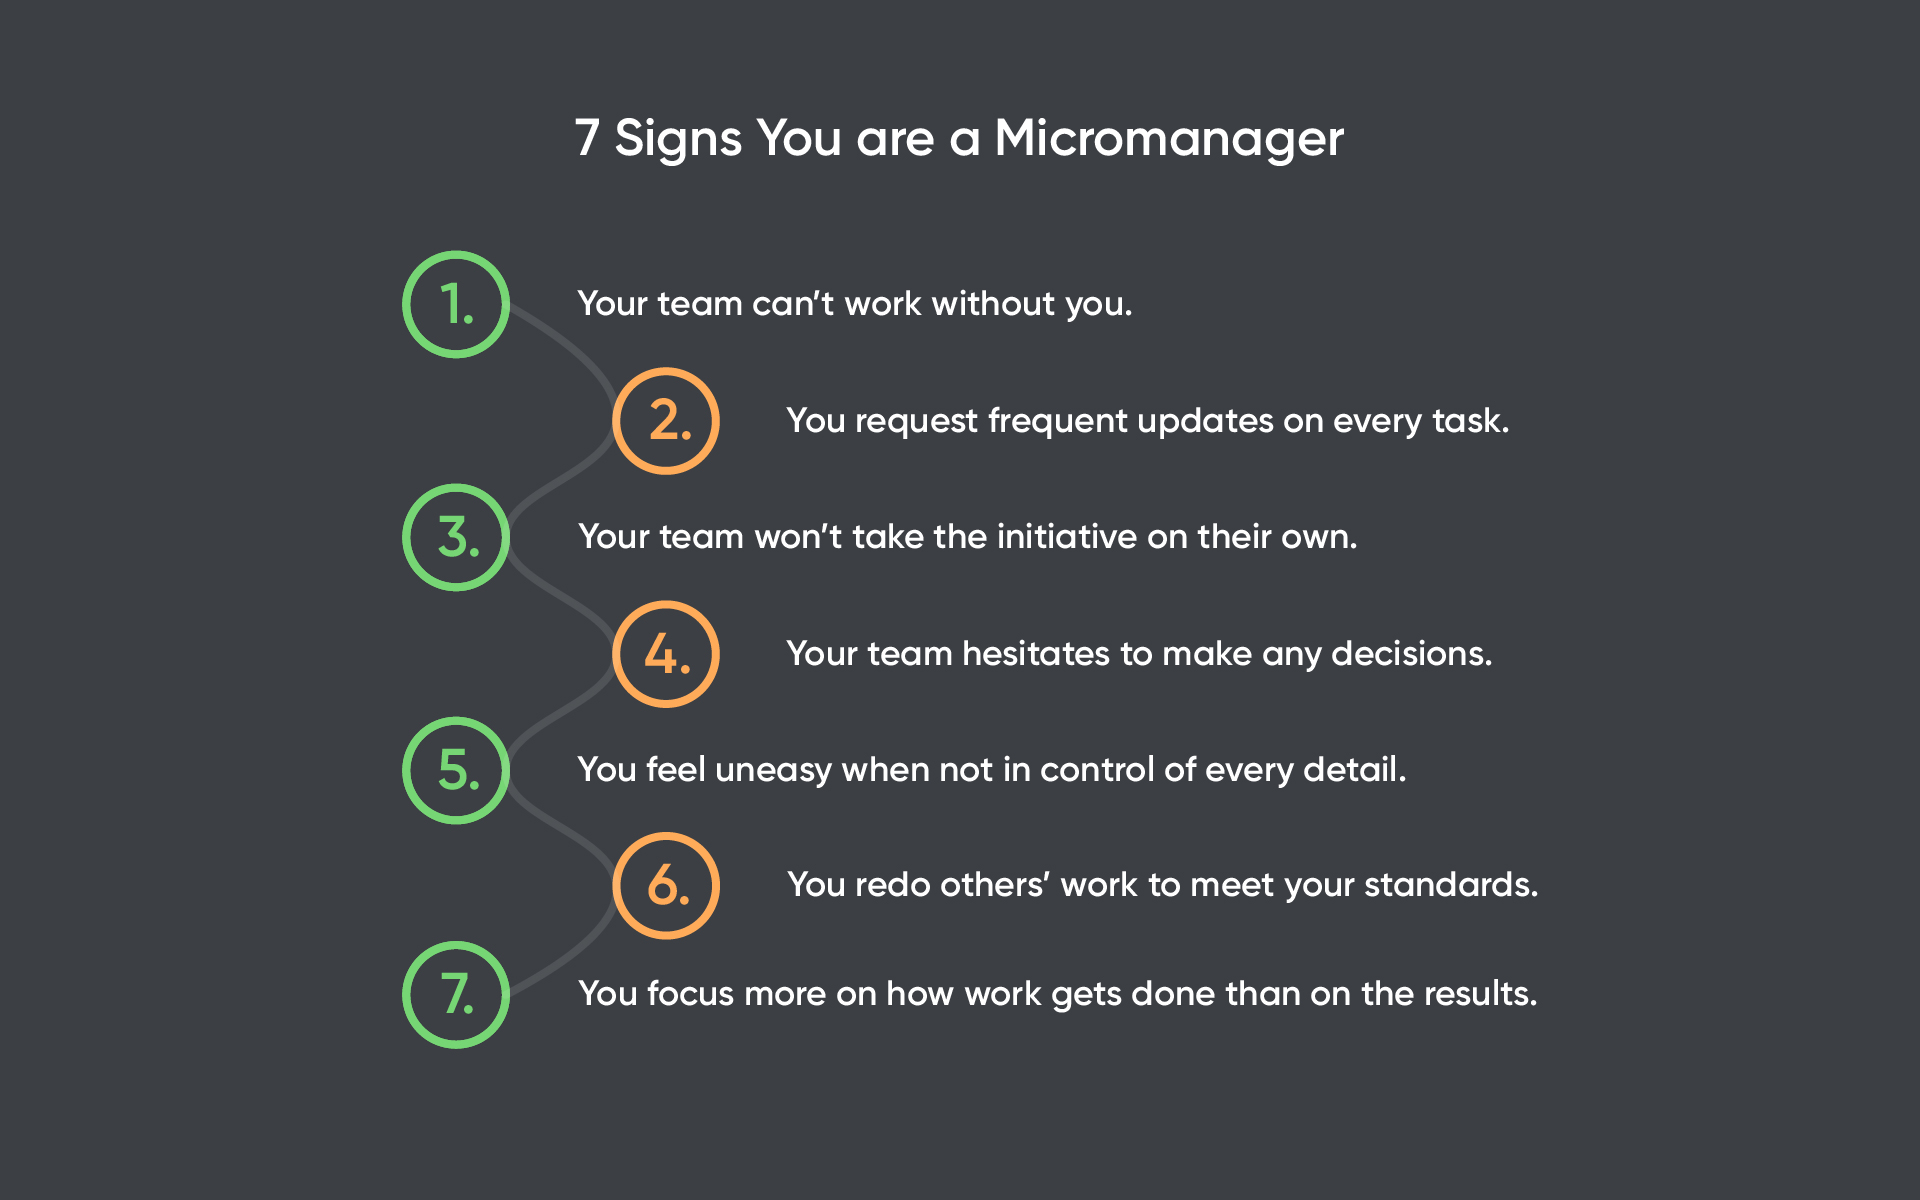 7 Signs You are a Micromanager